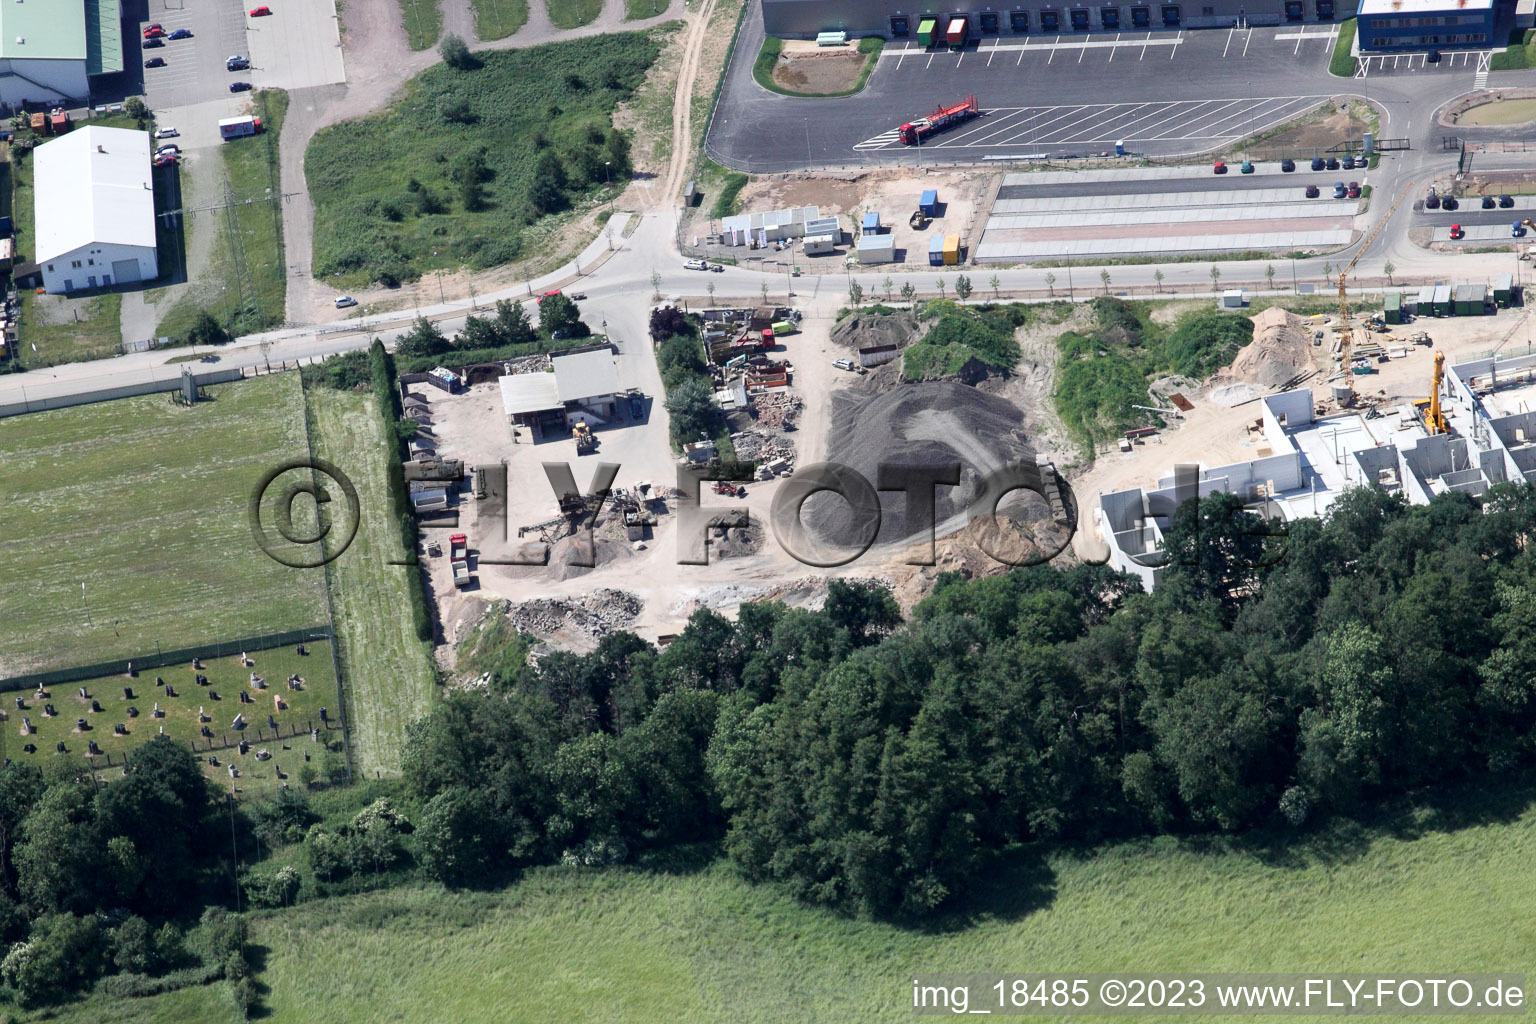 Drone image of Coincidence logistics center in the district Minderslachen in Kandel in the state Rhineland-Palatinate, Germany